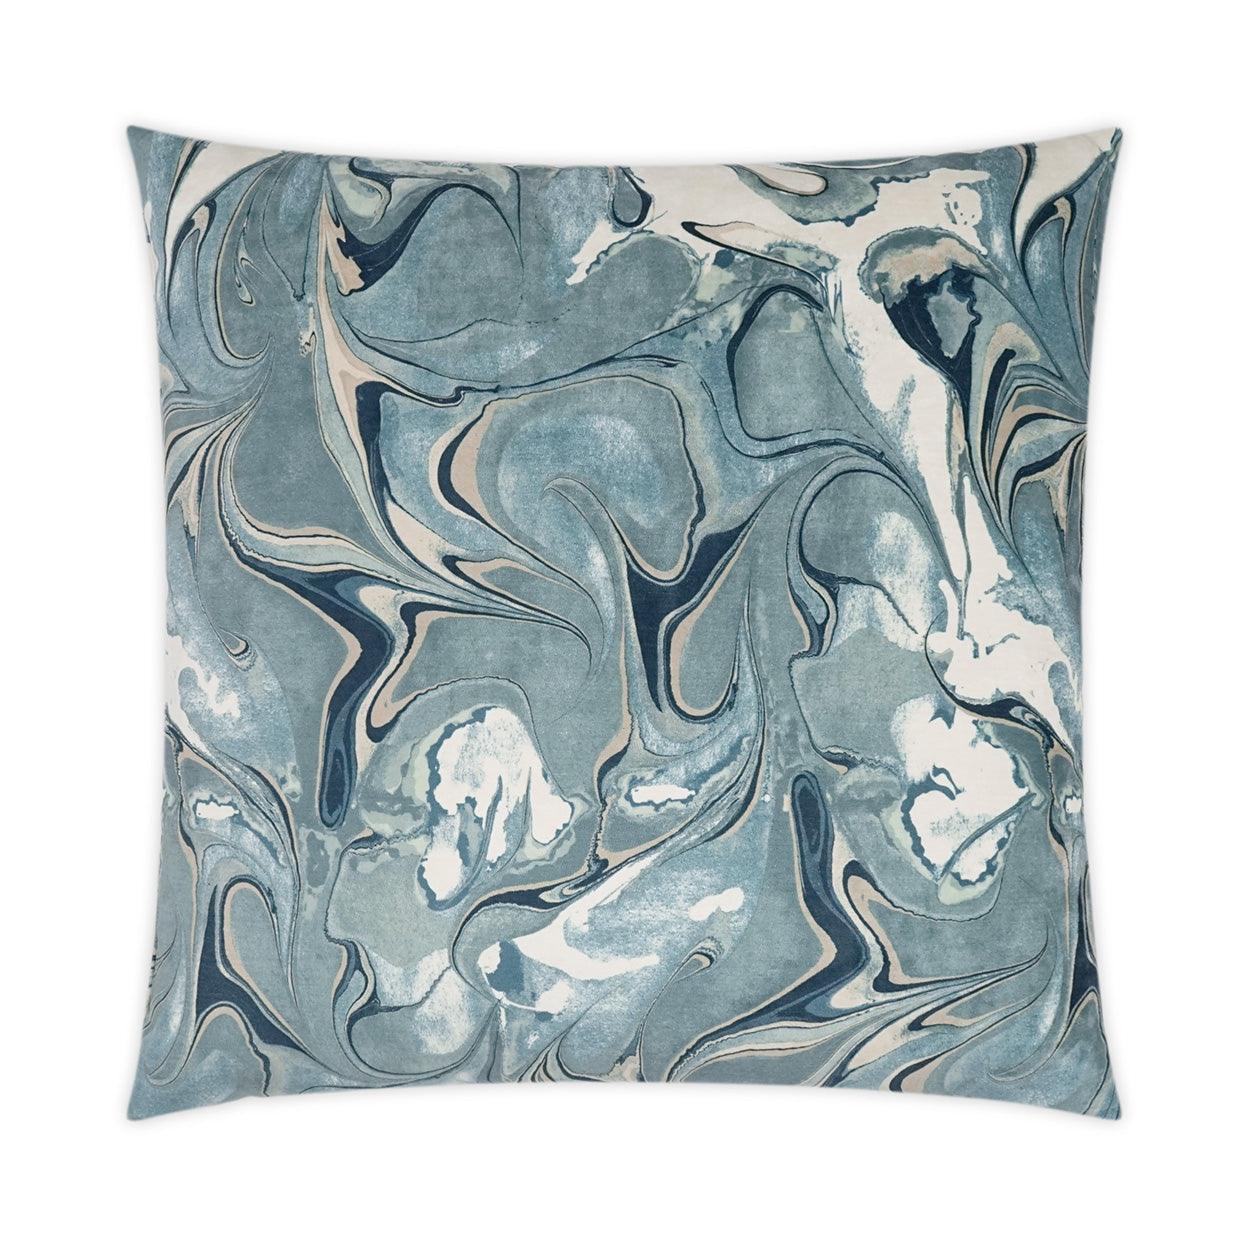 Juno River Modern Abstract Mist Large Throw Pillow With Insert - Uptown Sebastian